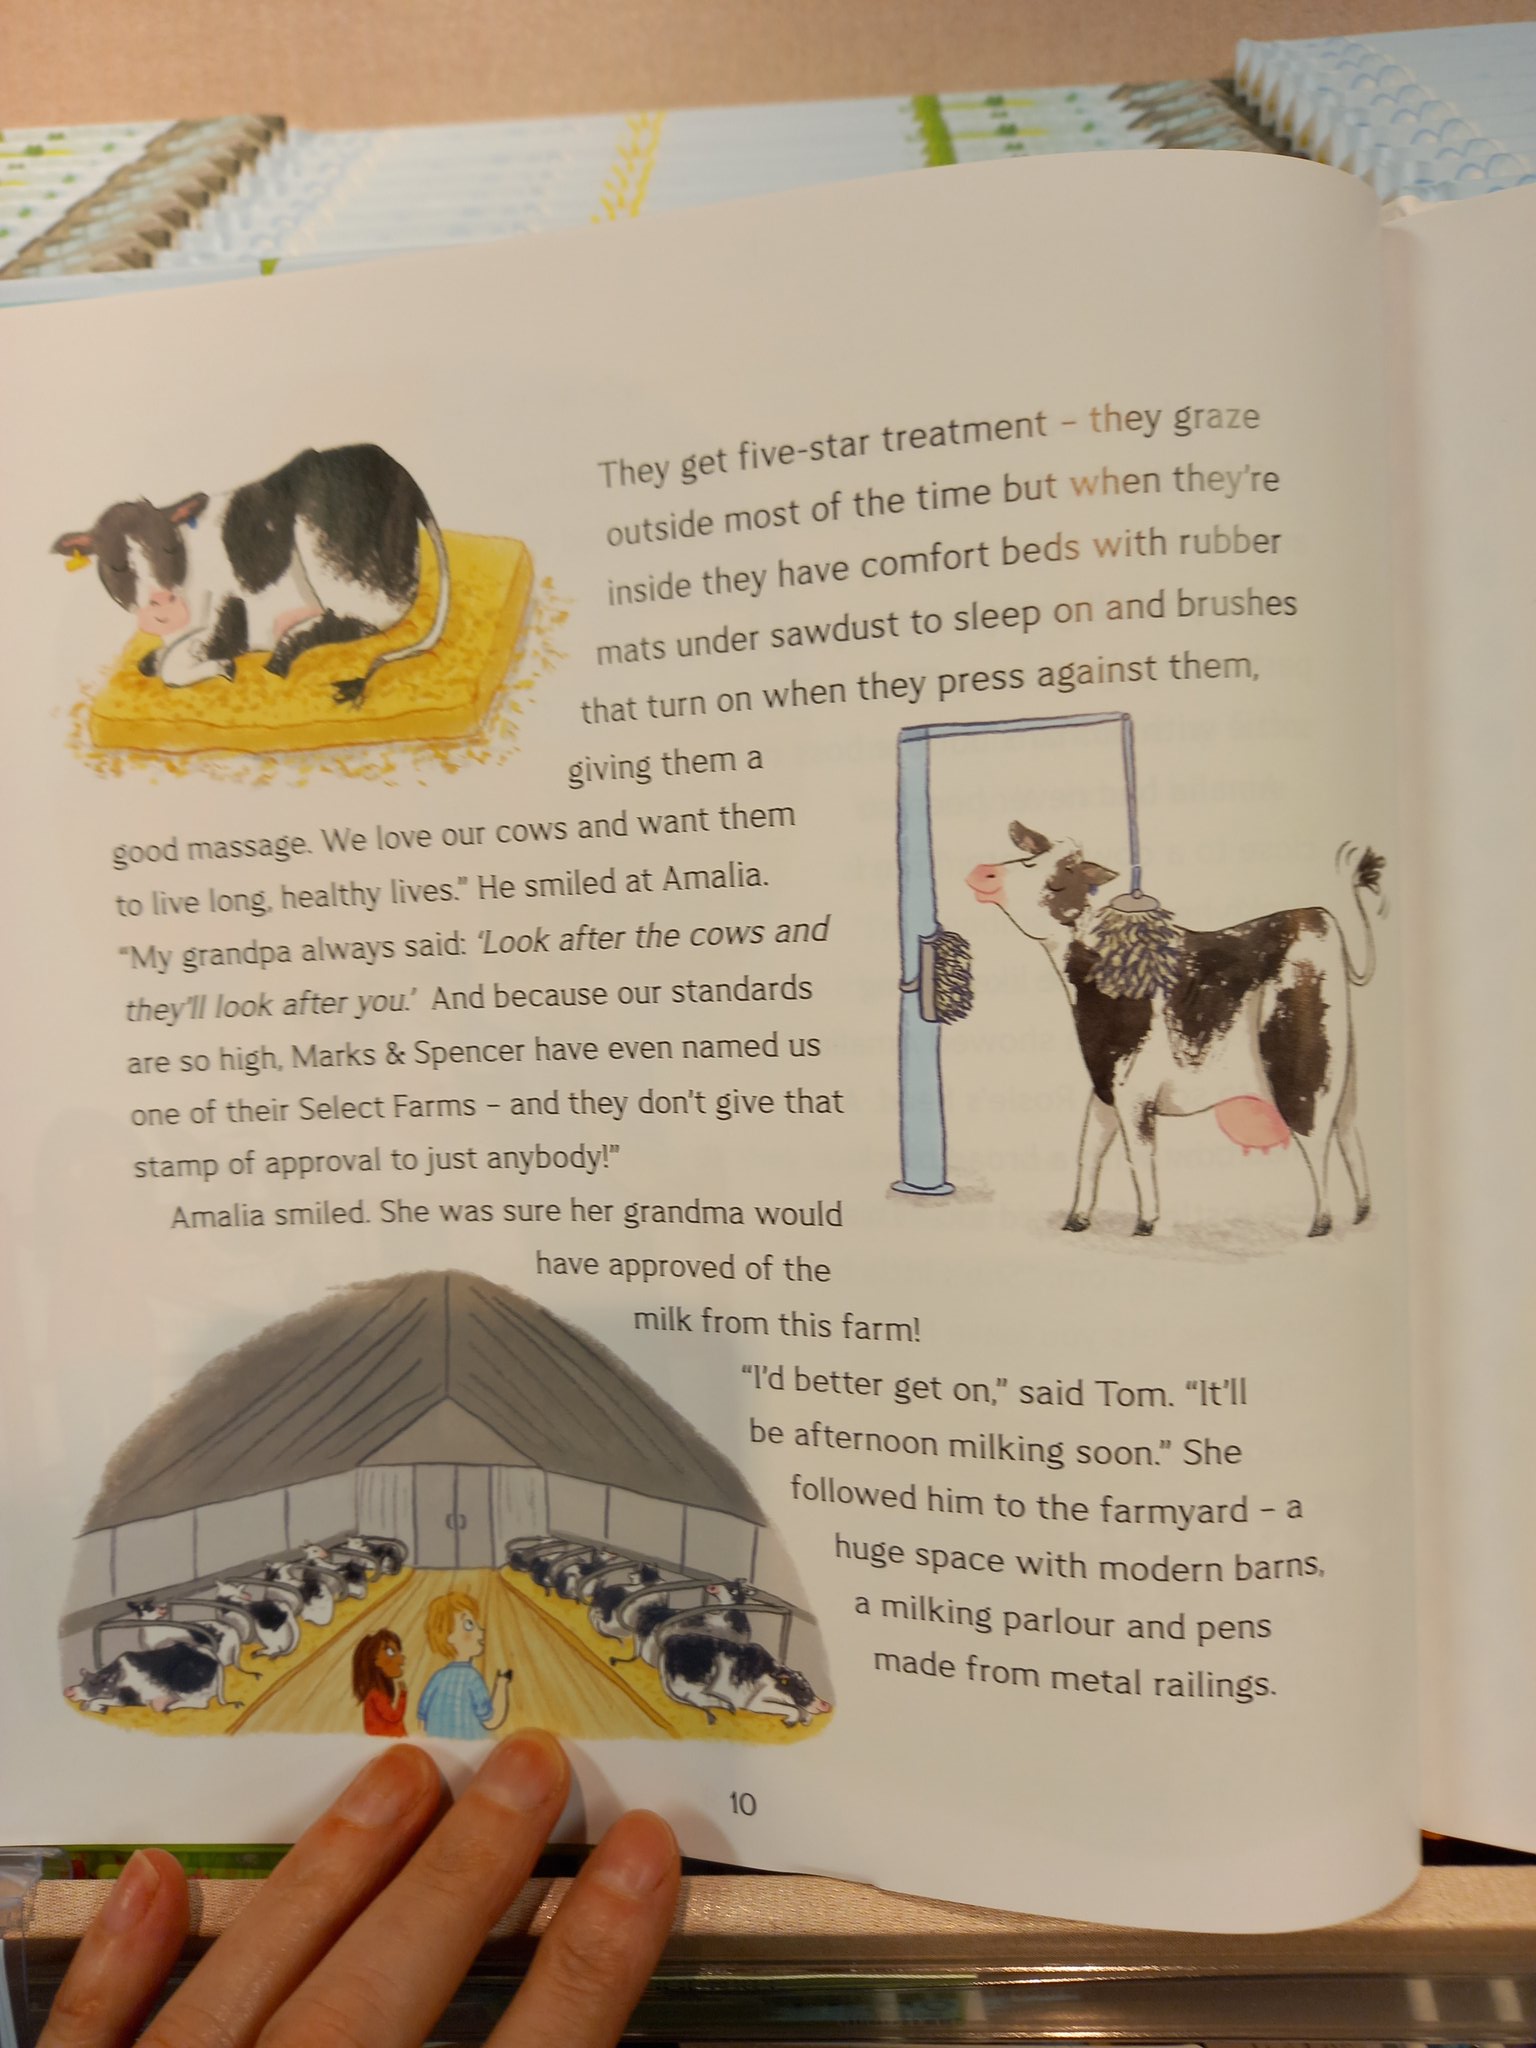 Description of how well M&S treat theirs dairy cows in their new children book "Farm to Foodhall"